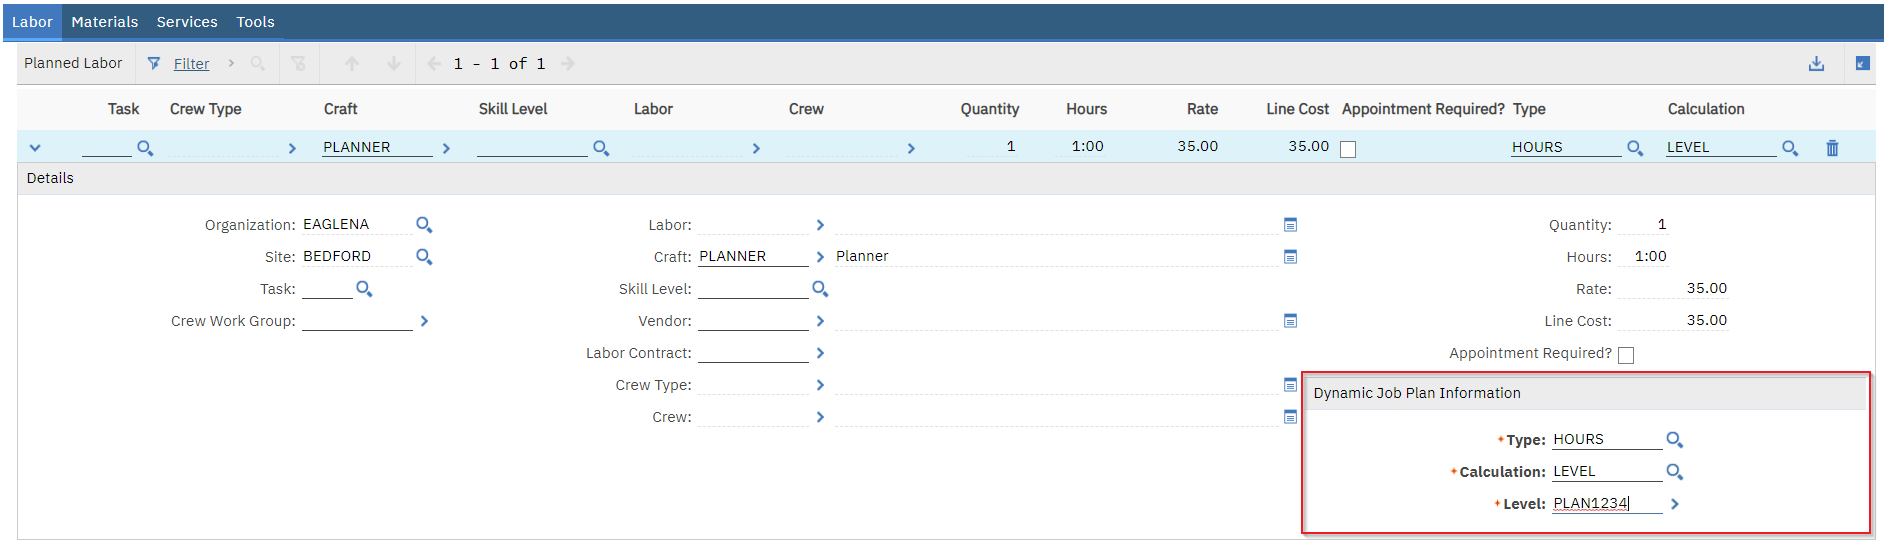 Screenshot of a level-based job plan in Maximo